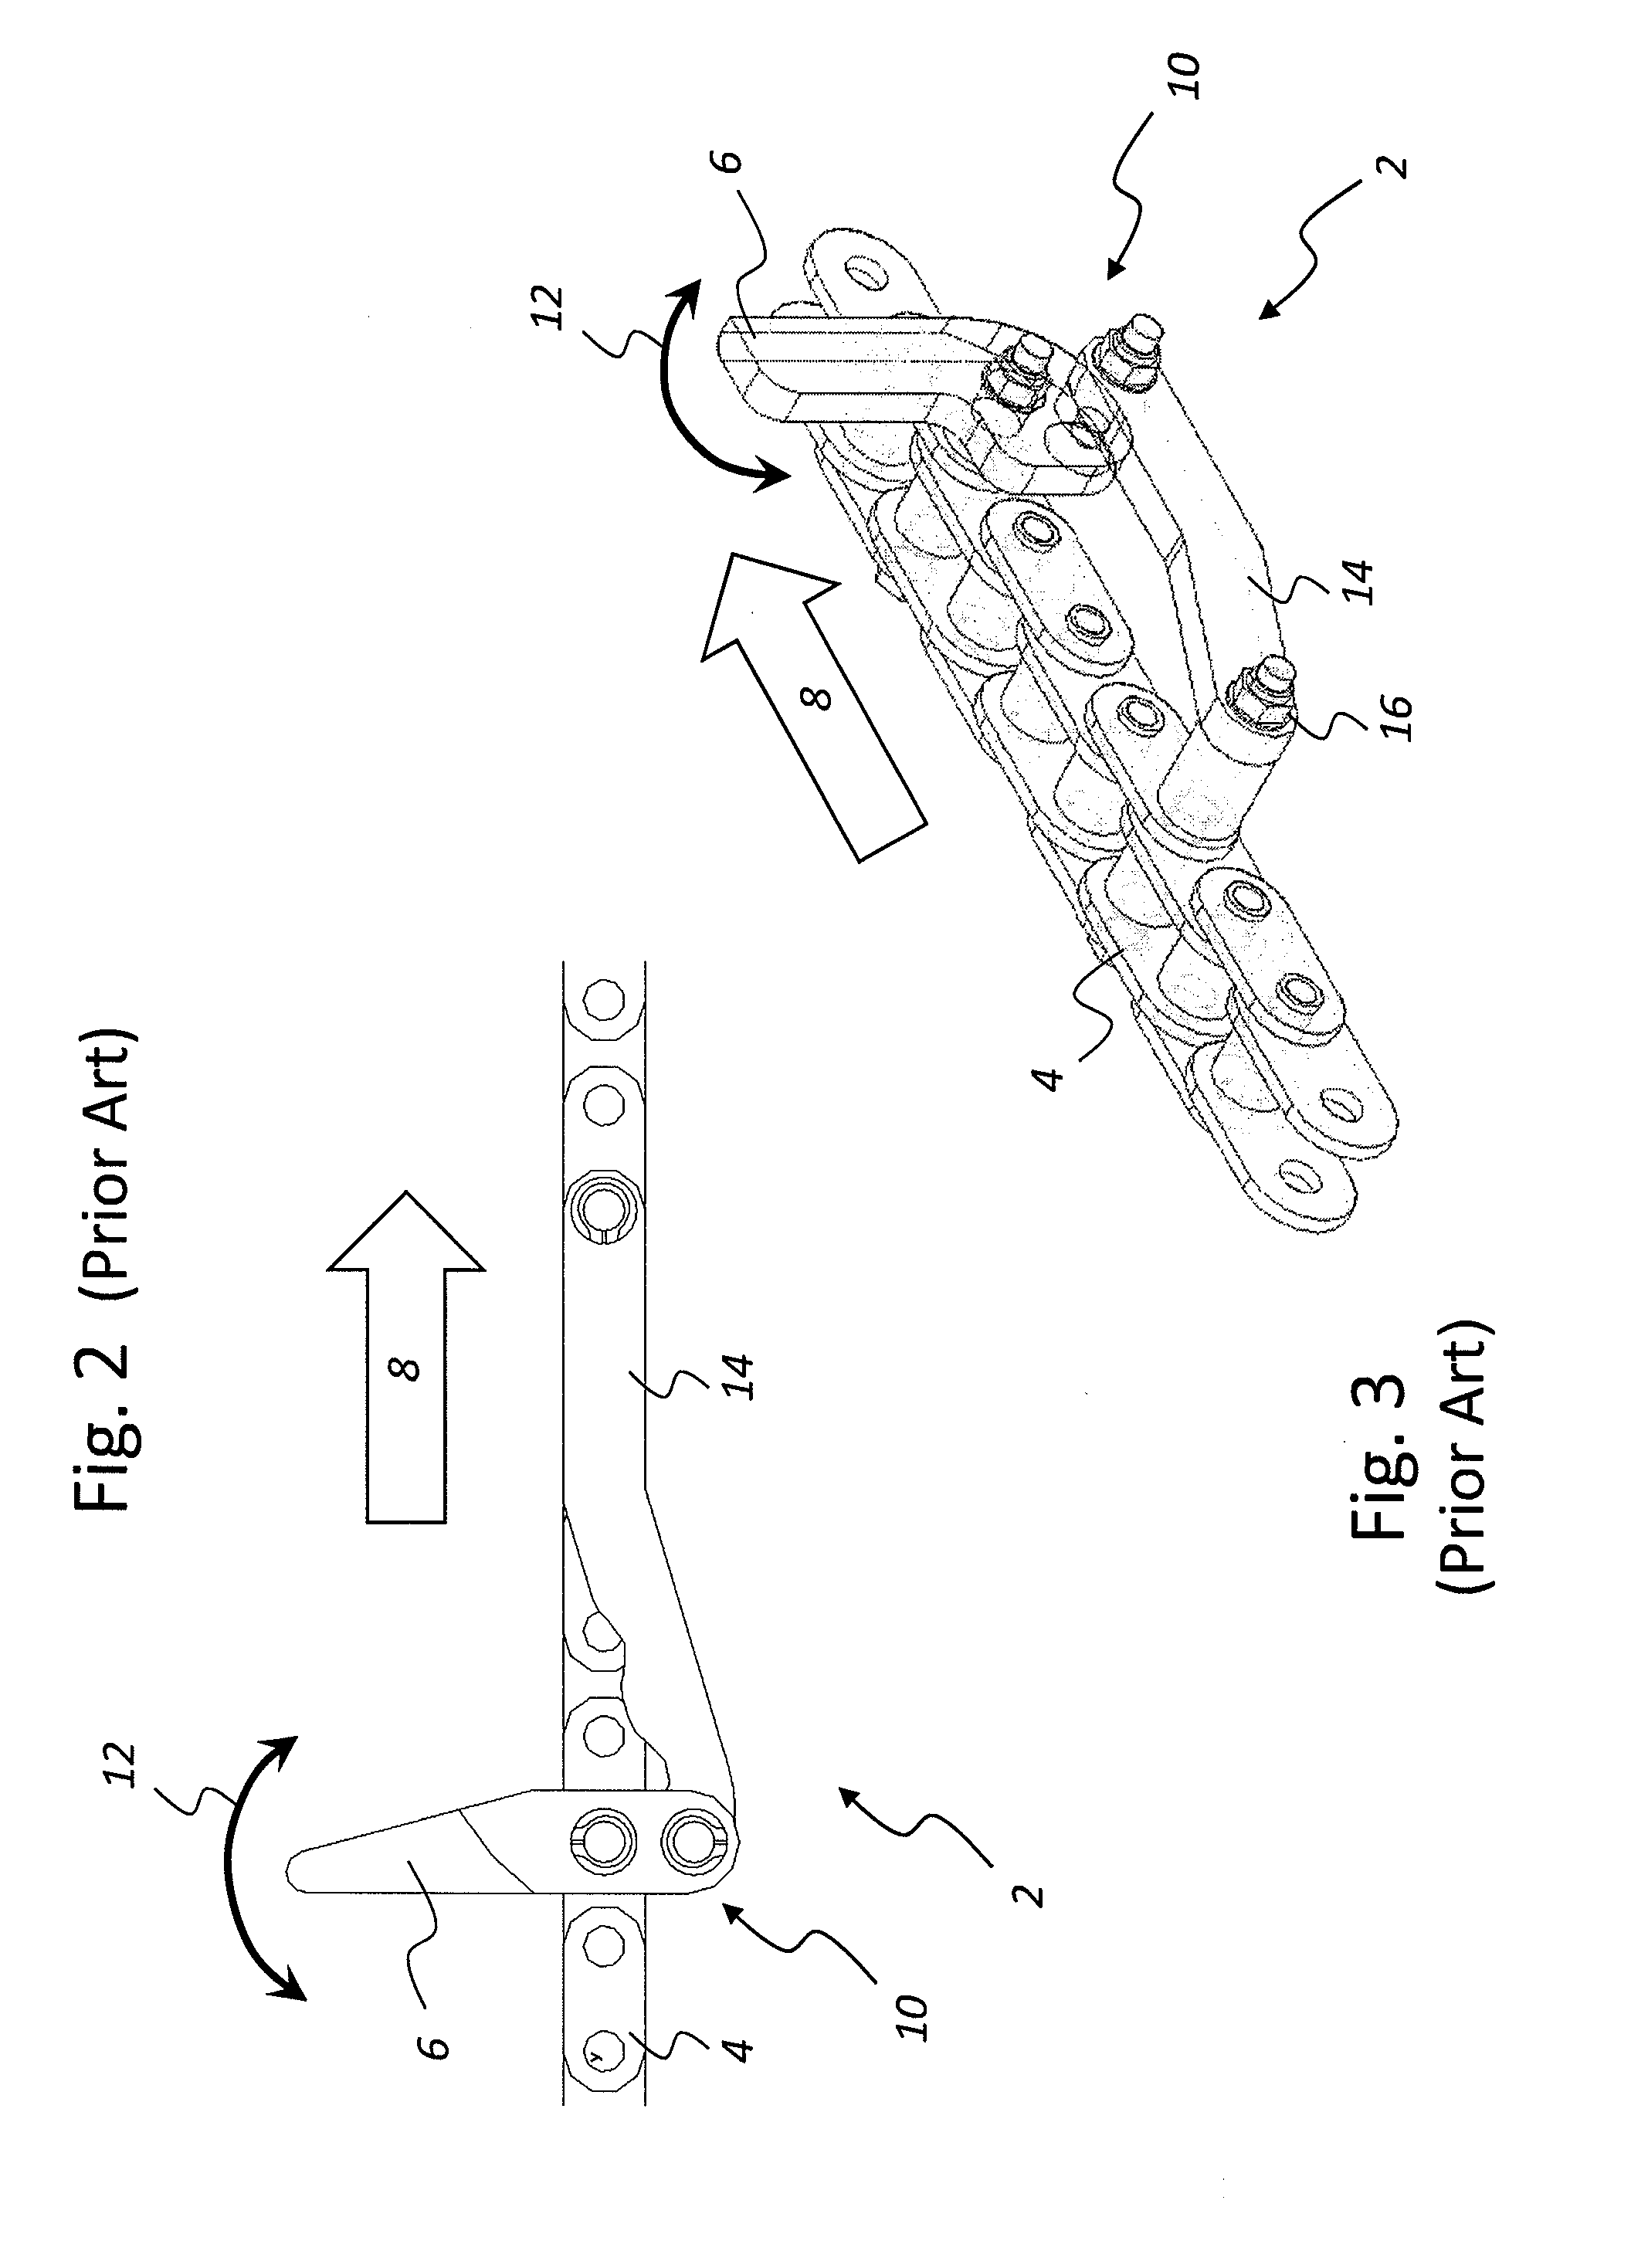 Folding device for article packaging